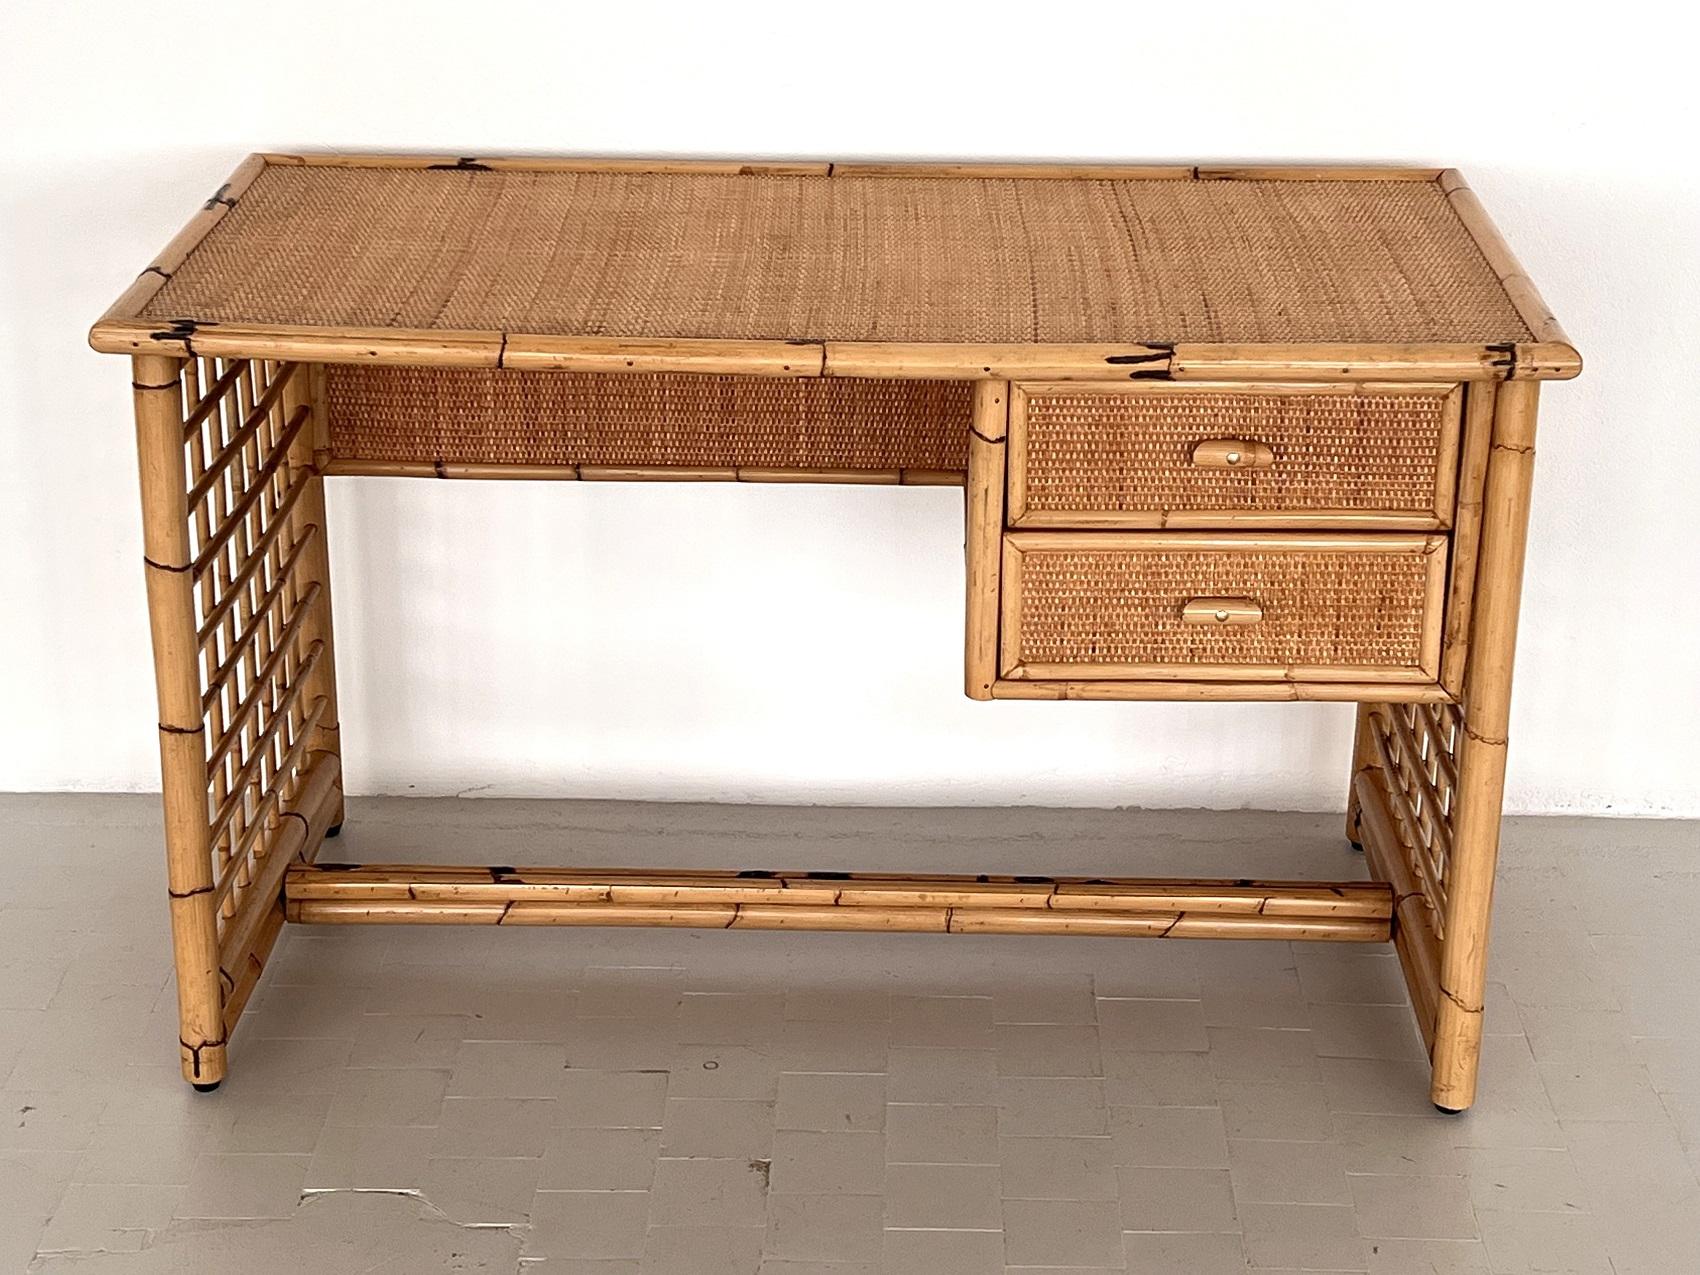 French Provincial Italian Midcentury Bamboo and Rattan Desk or Vanity with two Drawers, 1970s For Sale